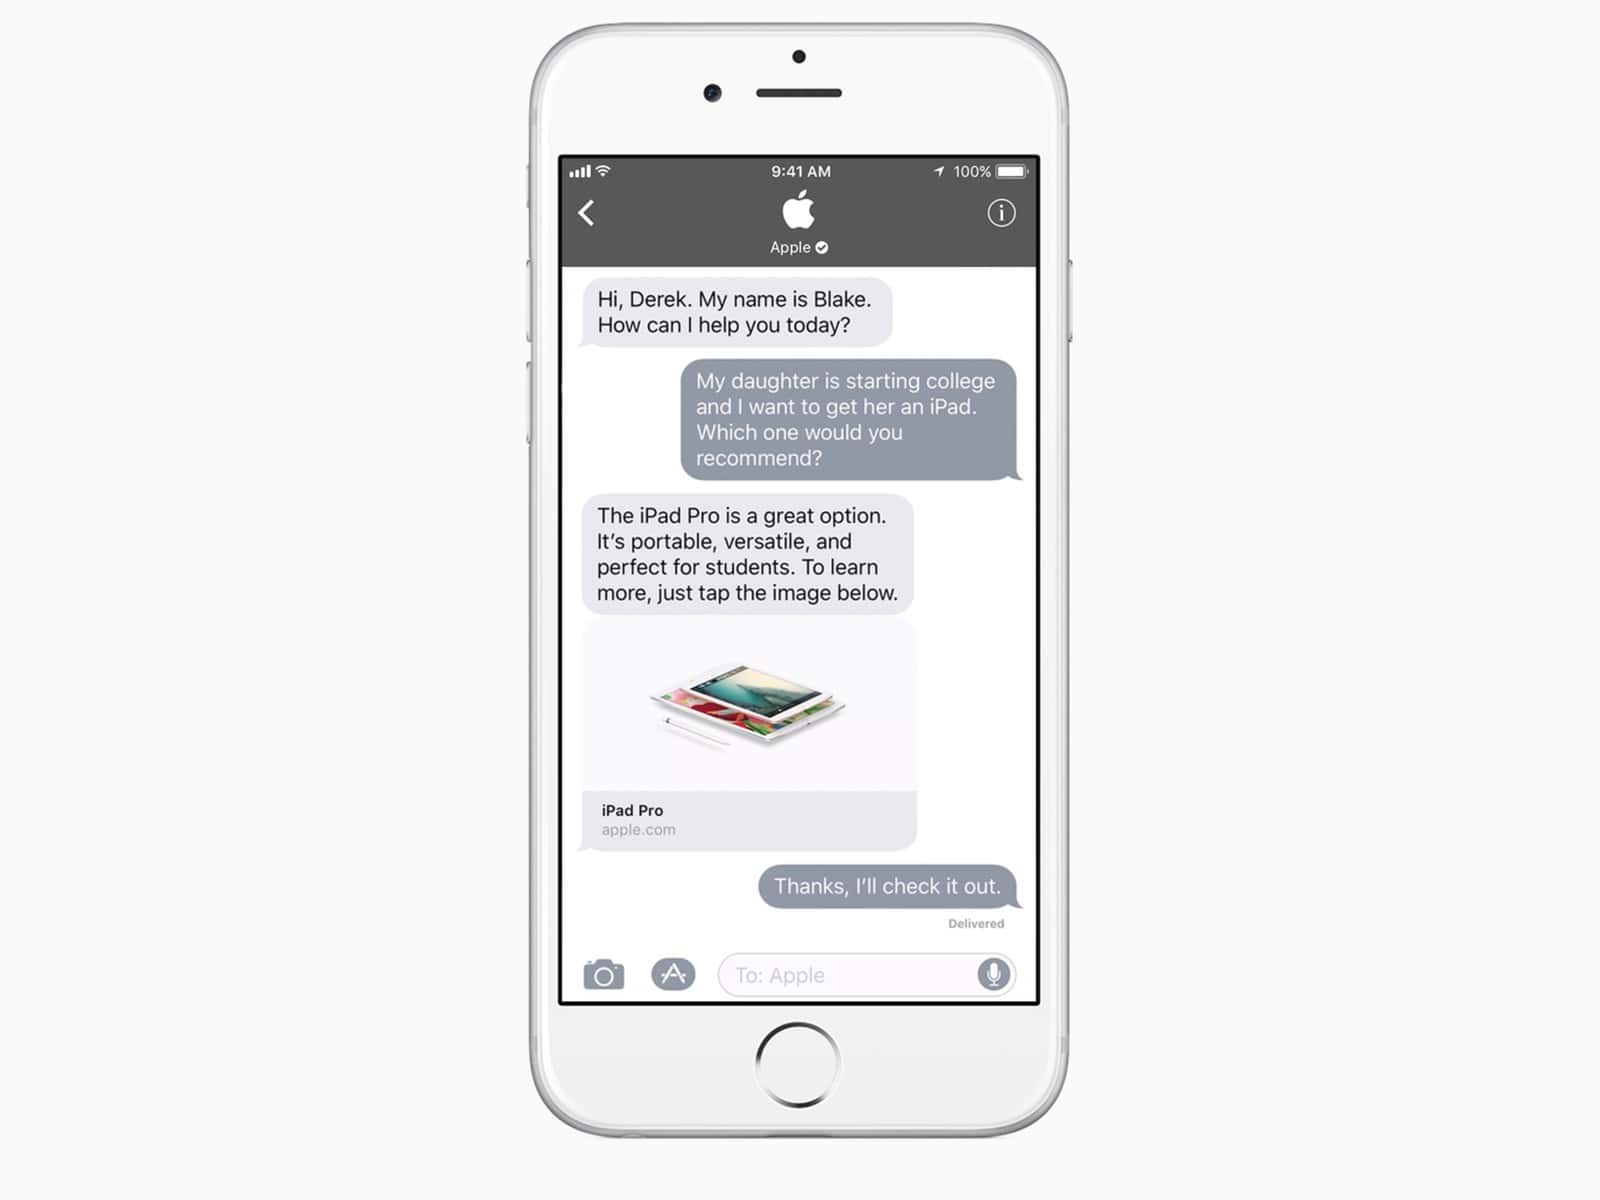 Screenshot of a customer interaction with Apple in iMessage as part of Apple Business Chat.